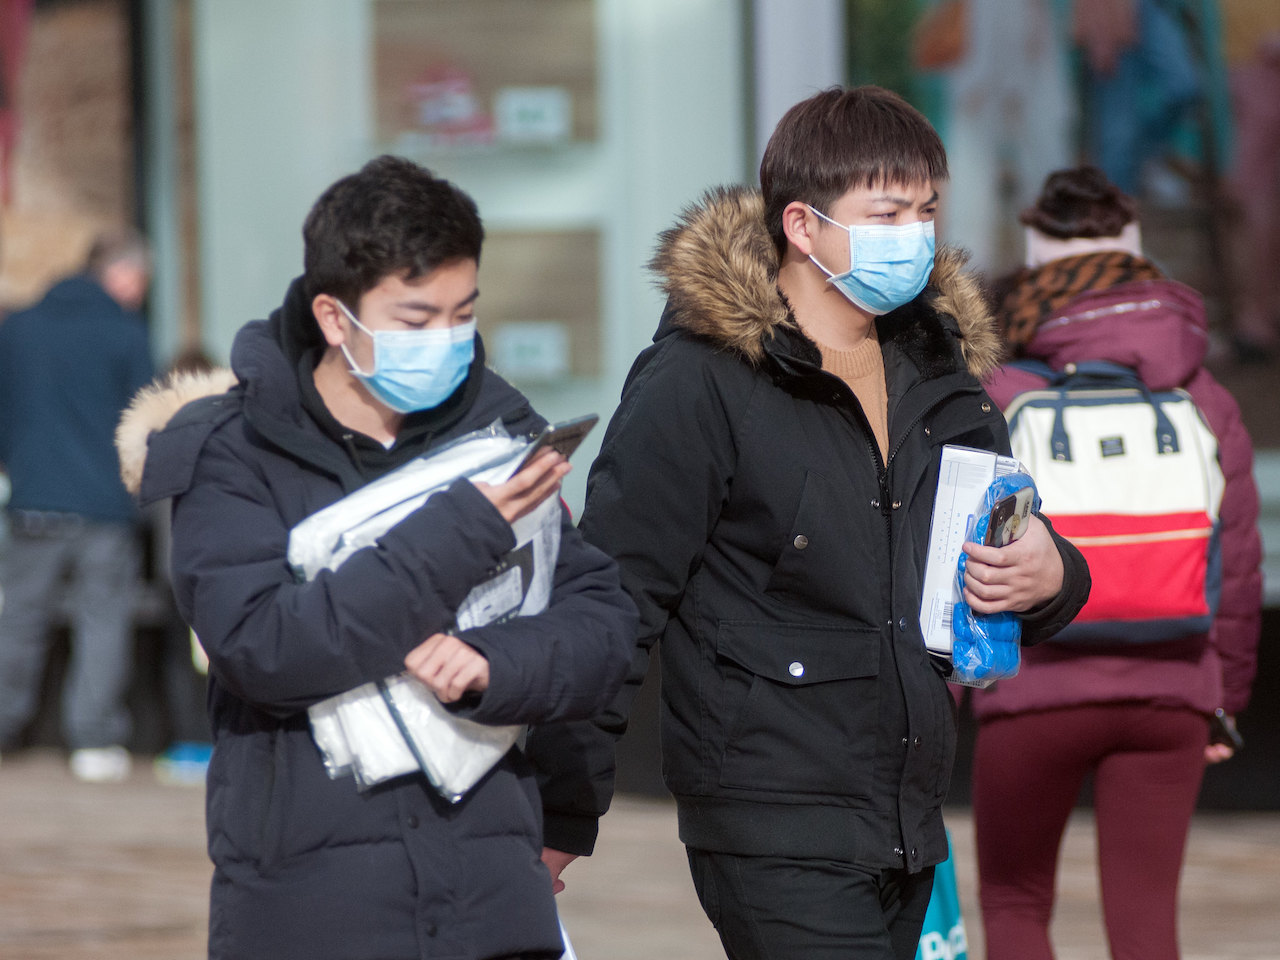 People wearing masks due COVID surge in China